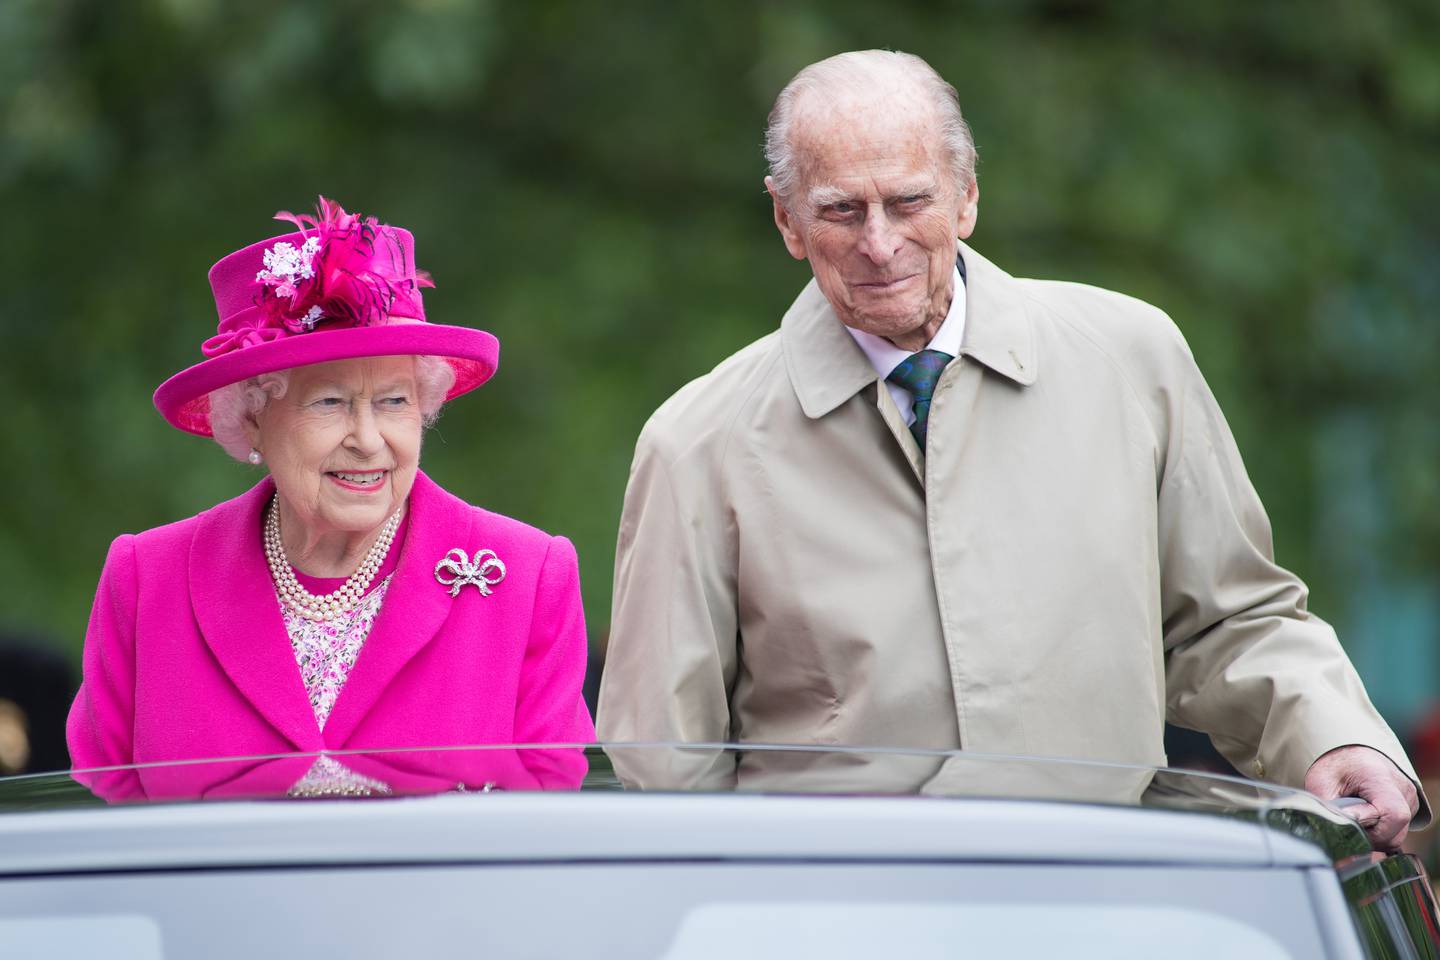 Queen Elizabeth and Prince Philip, Duke of Edinburgh during celebrations for the queen's 90th birthday in 2016, in London. Getty Images